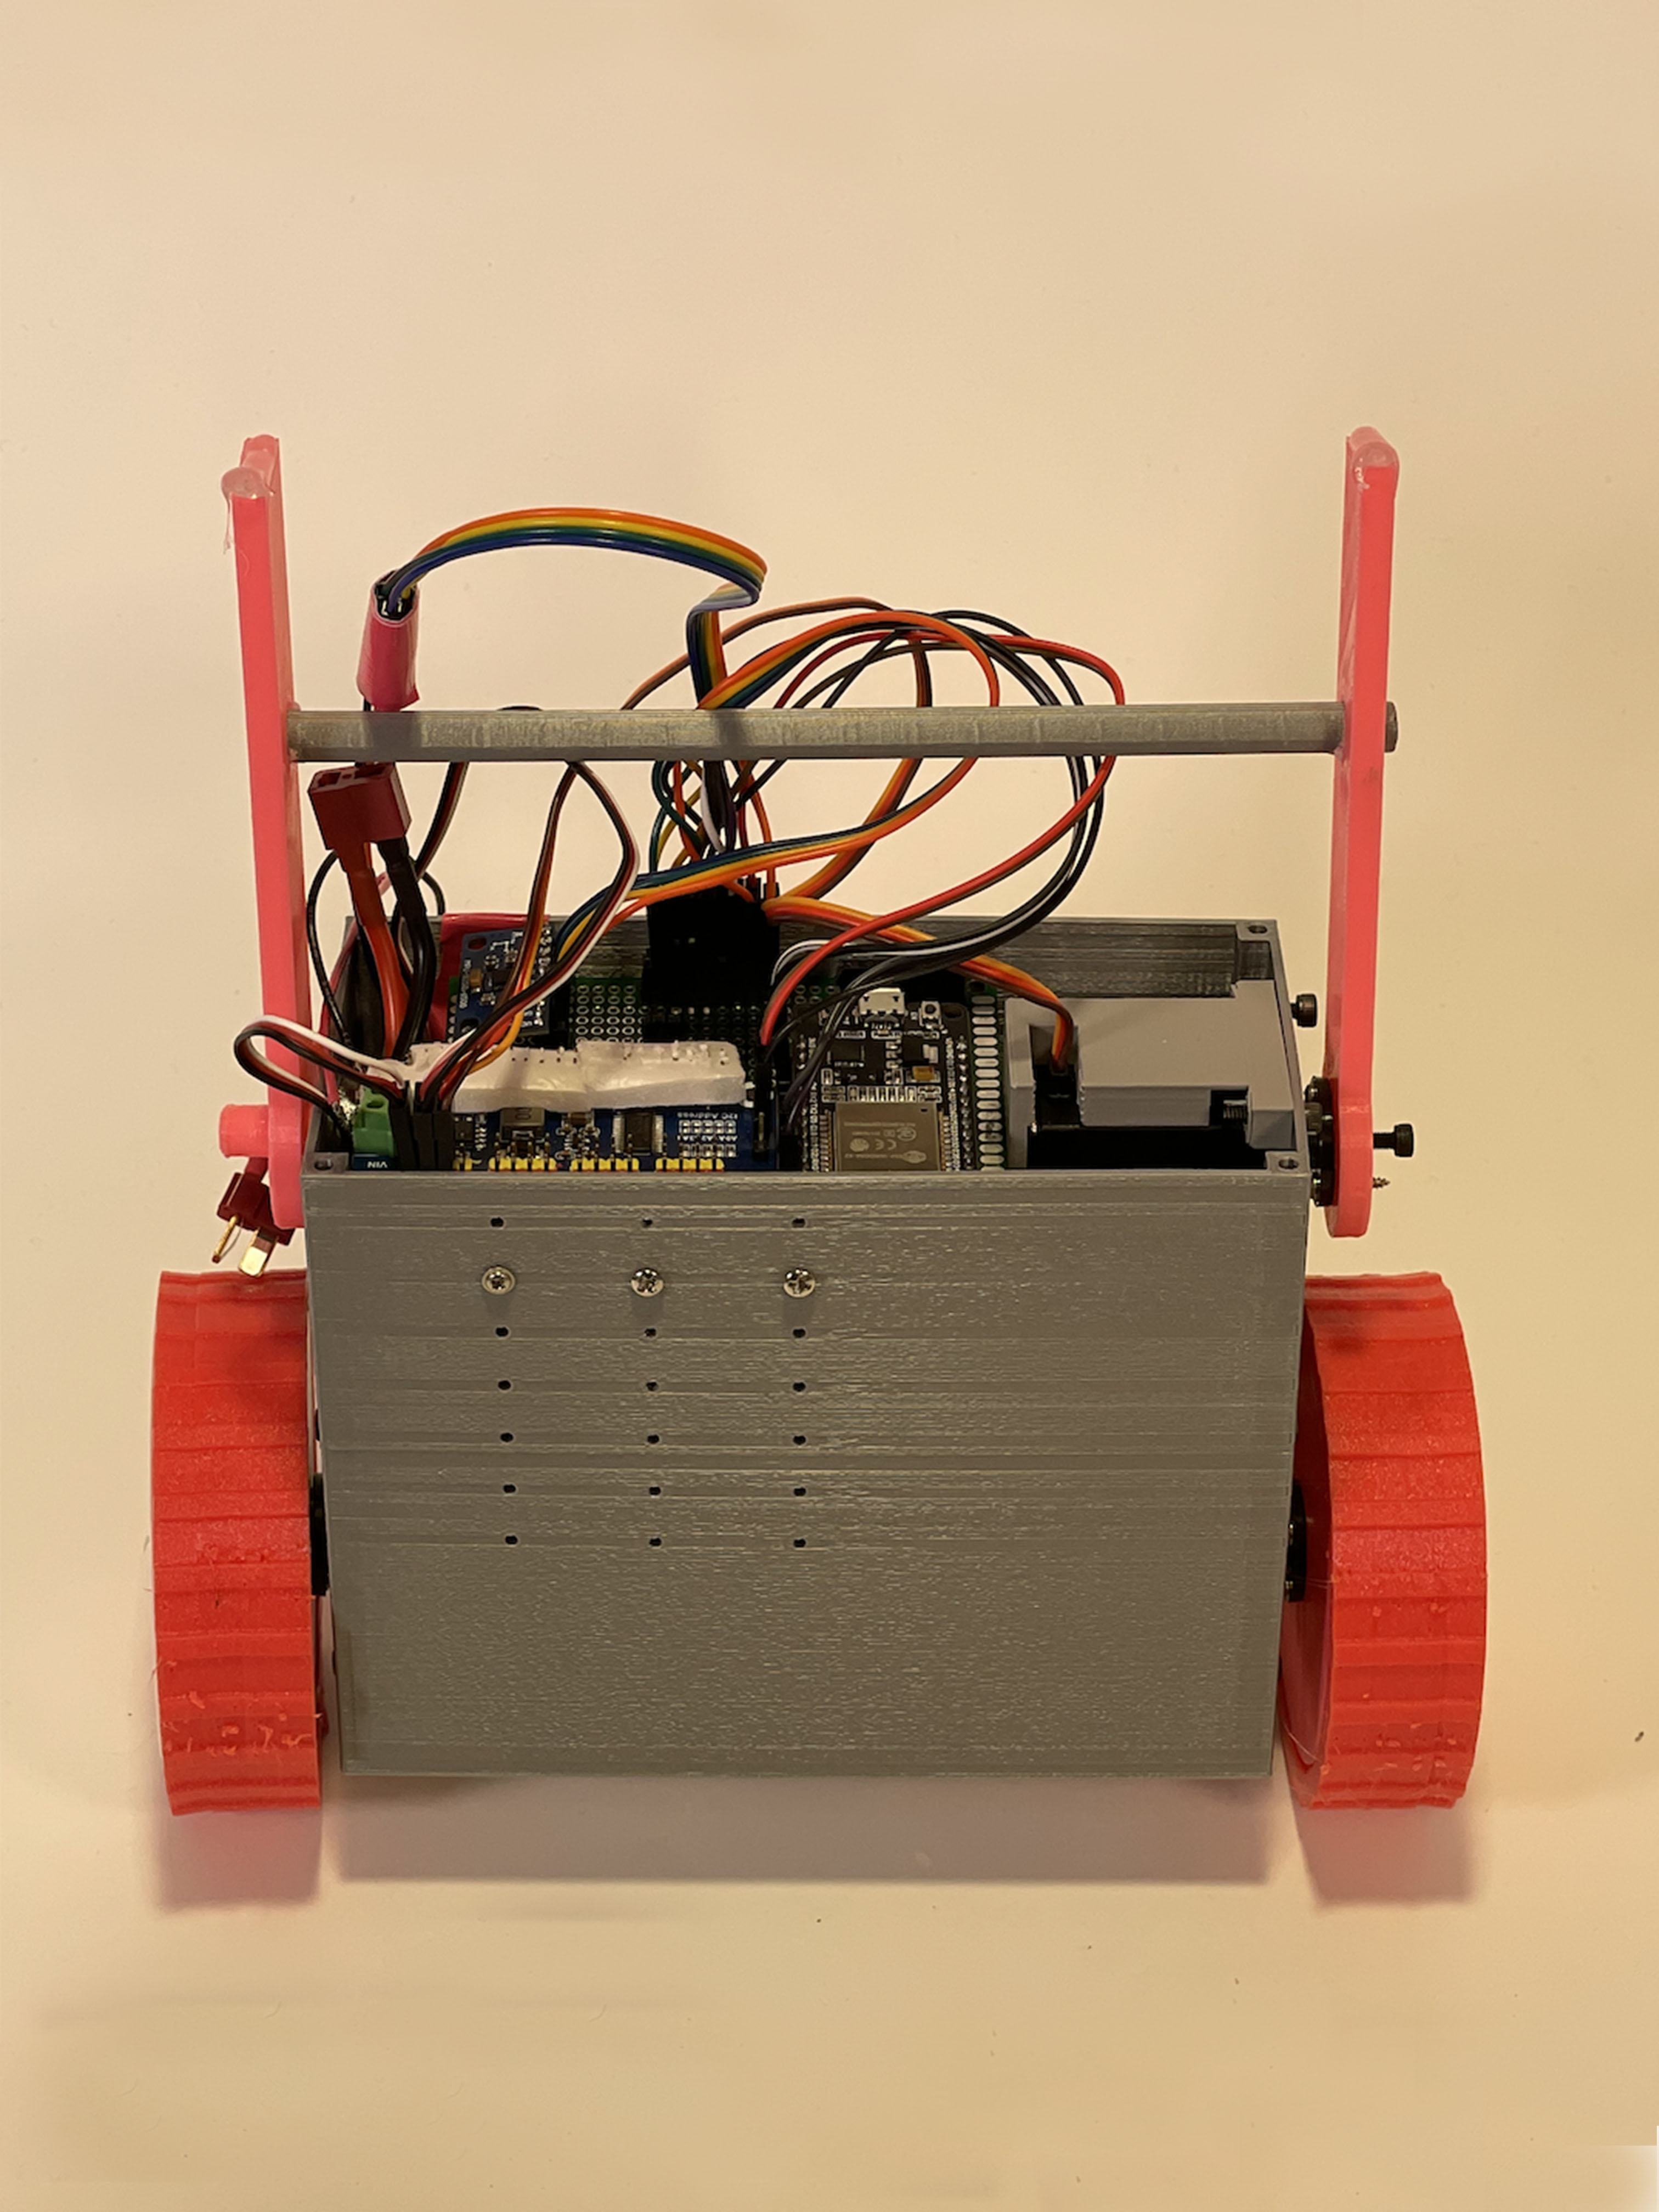 Self Balancing Robot that could pick itself up using its arms and balanced with combined sensor data from a Lidar and an IMU. Filtered the IMU data and used a PD controller for balance. The Lidar was used to determine default conditions and when the robot had fallen over, used LIDAR information to pick itself up.